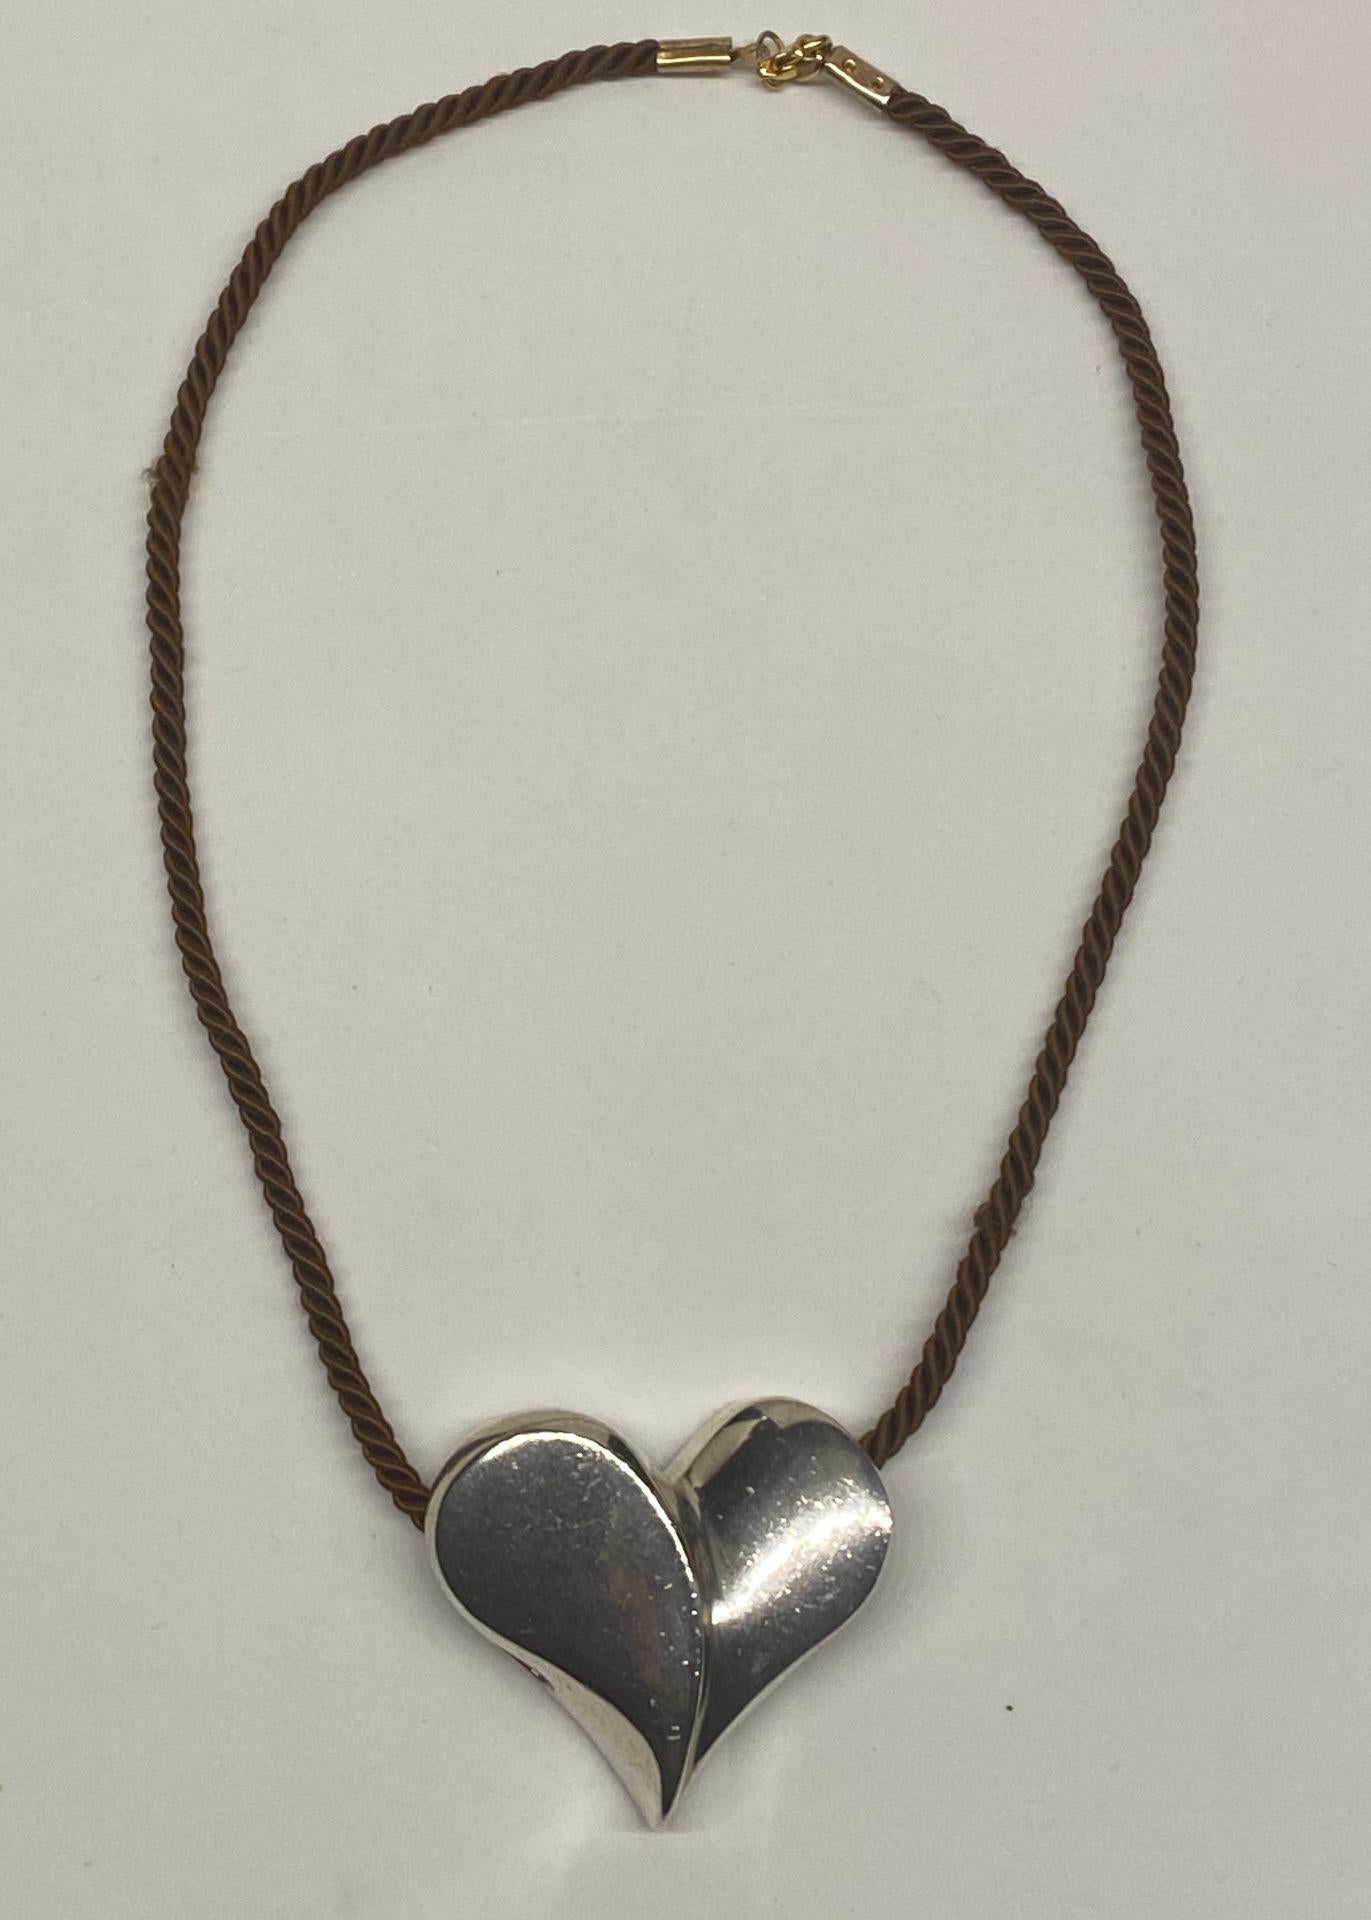 Modernist design sterling silver heart pendant by New York City jewelry design team Jack Brusca and Joseph Dante in 1975. The pendant is 2 inches wide, 1.75 inches high and .75 of an inch deep in cast sterling silver. It is shown on and included